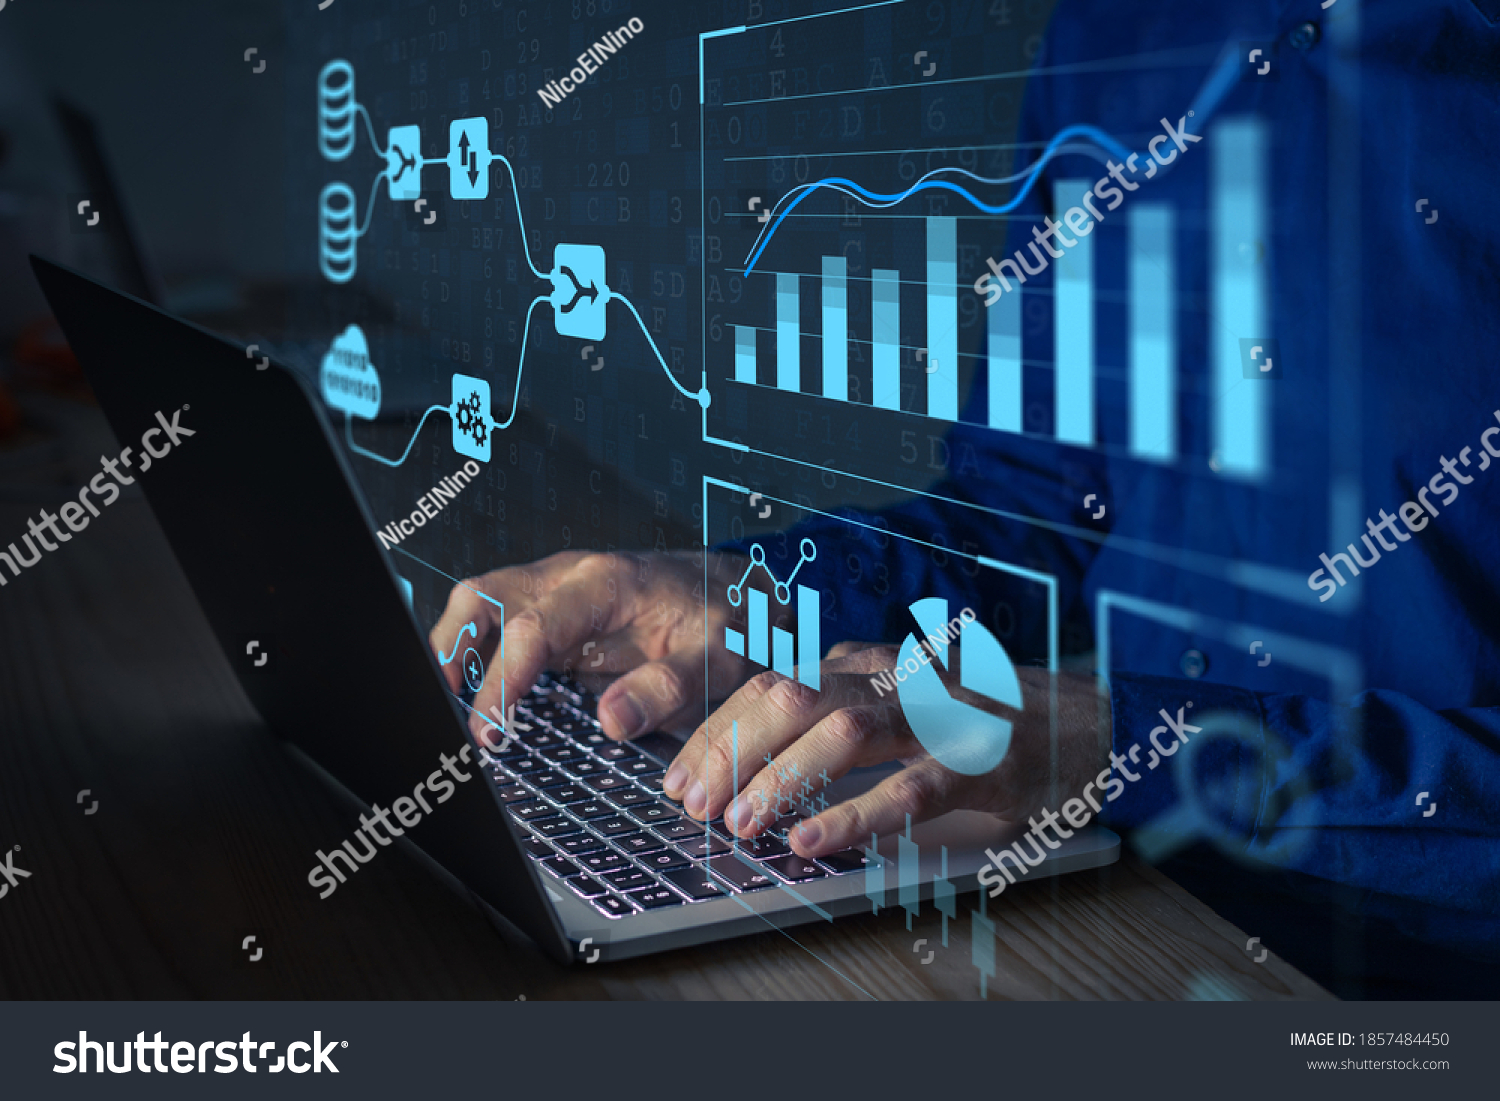 Analyst working with Business Analytics and Data Management System on computer to make report with KPI and metrics connected to database. Corporate strategy for finance, operations, sales, marketing #1857484450